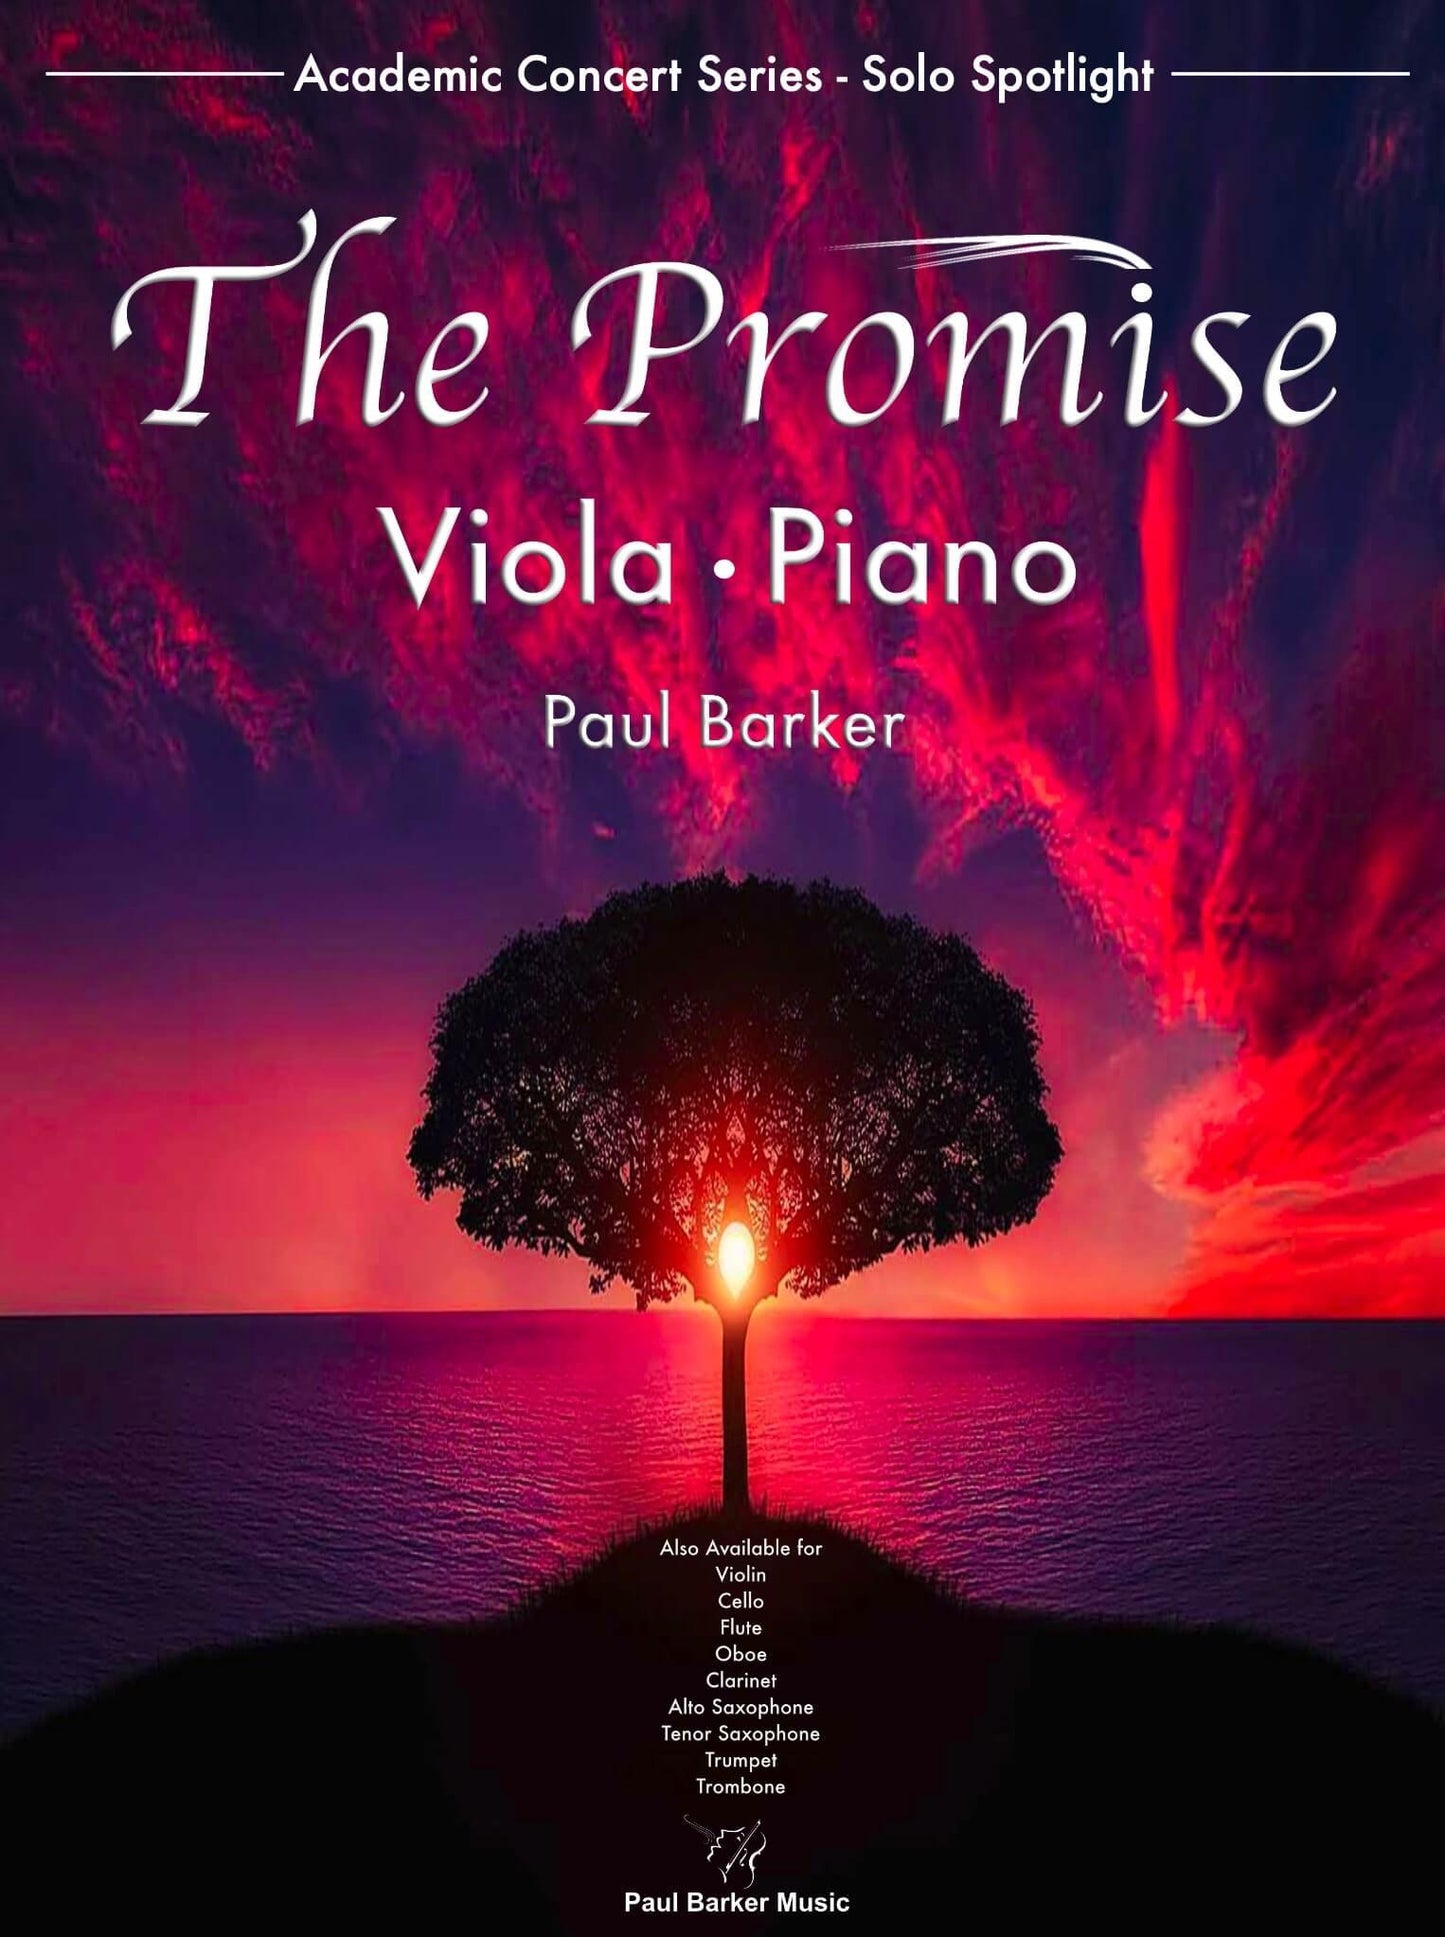 The Promise [Viola & Piano] - Paul Barker Music 